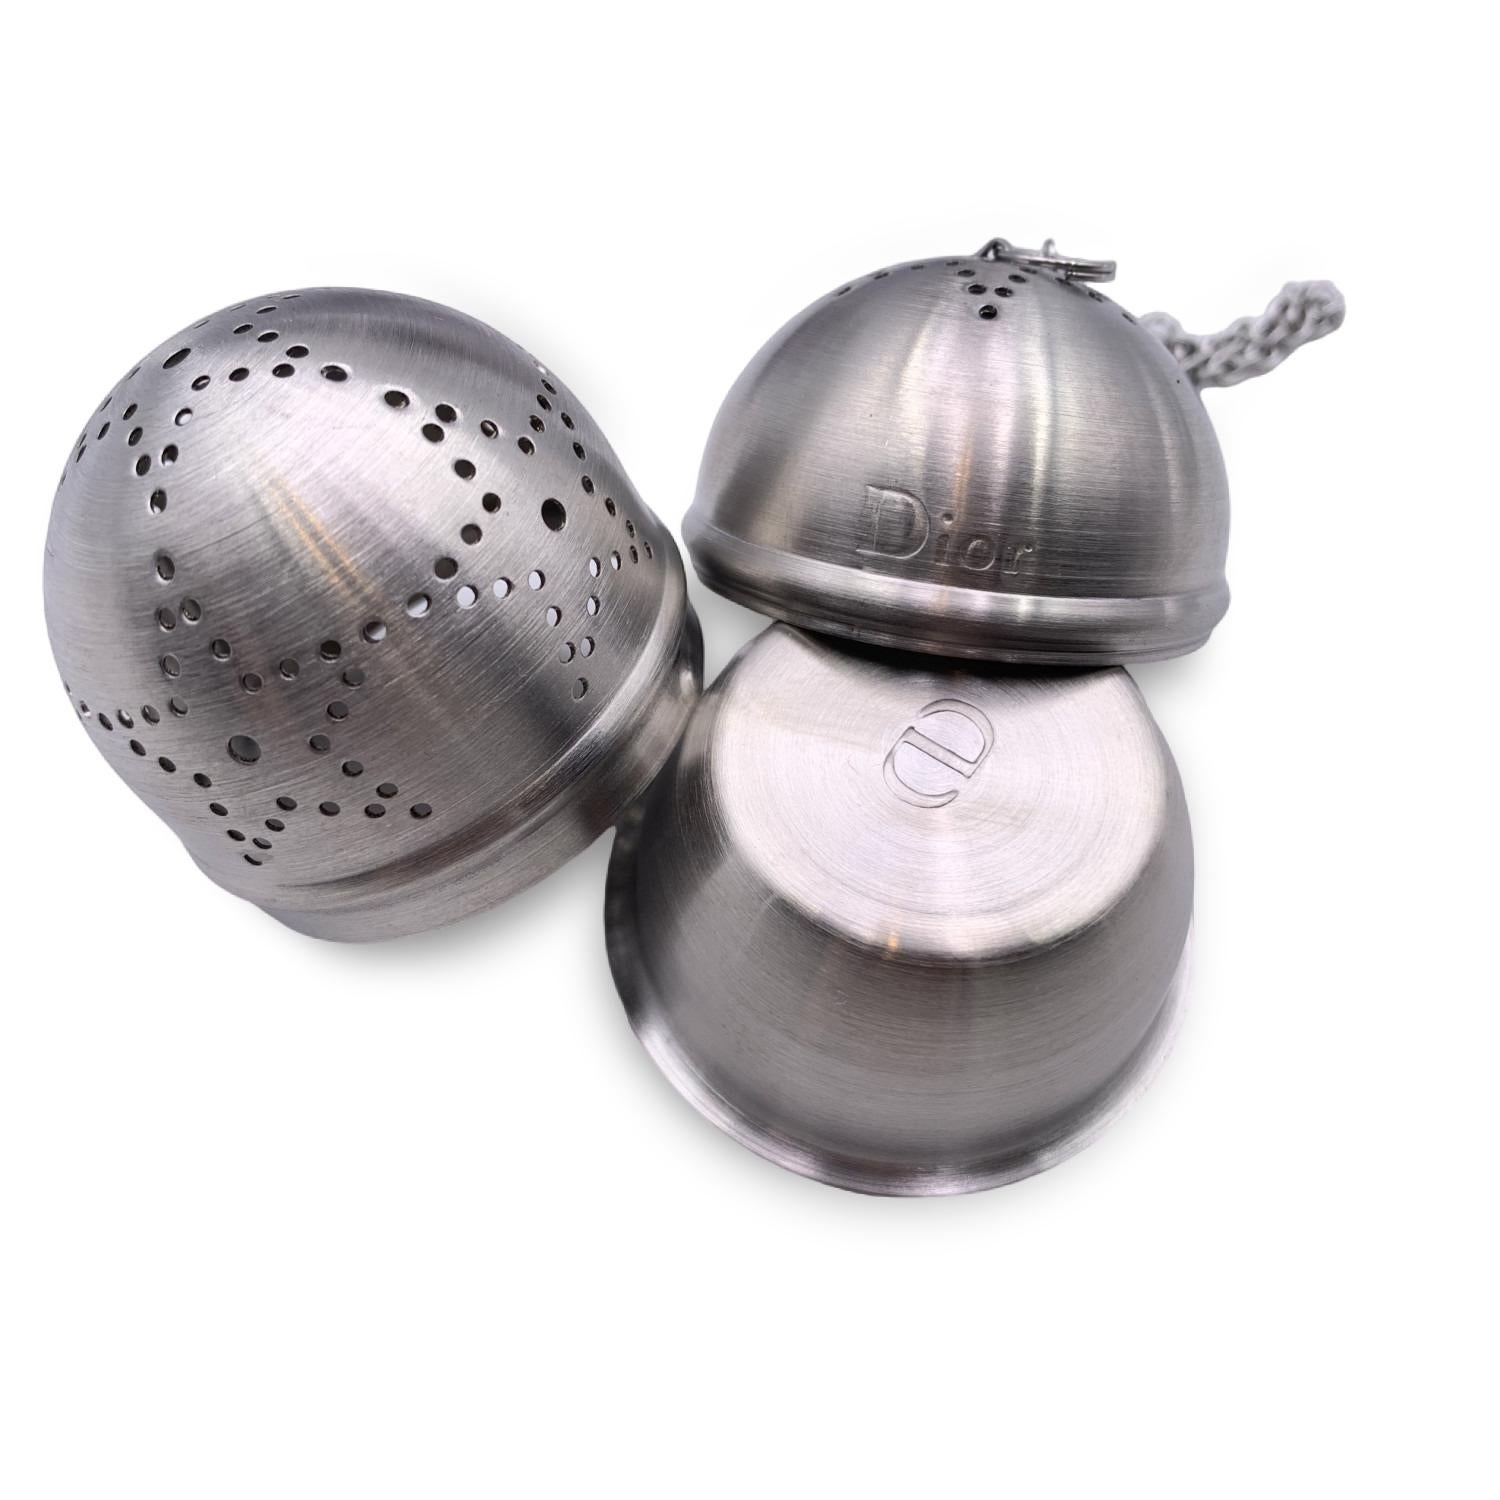 Beautiful set of 3 tea infusers by Christian Dior. The set consists of three silver metal tea infusers with plates. Each infuser nillustrates an iconic facet of the House of Dior style: Houndstooth, Cannage and Christian Dior's Lucky star. 'Dior'